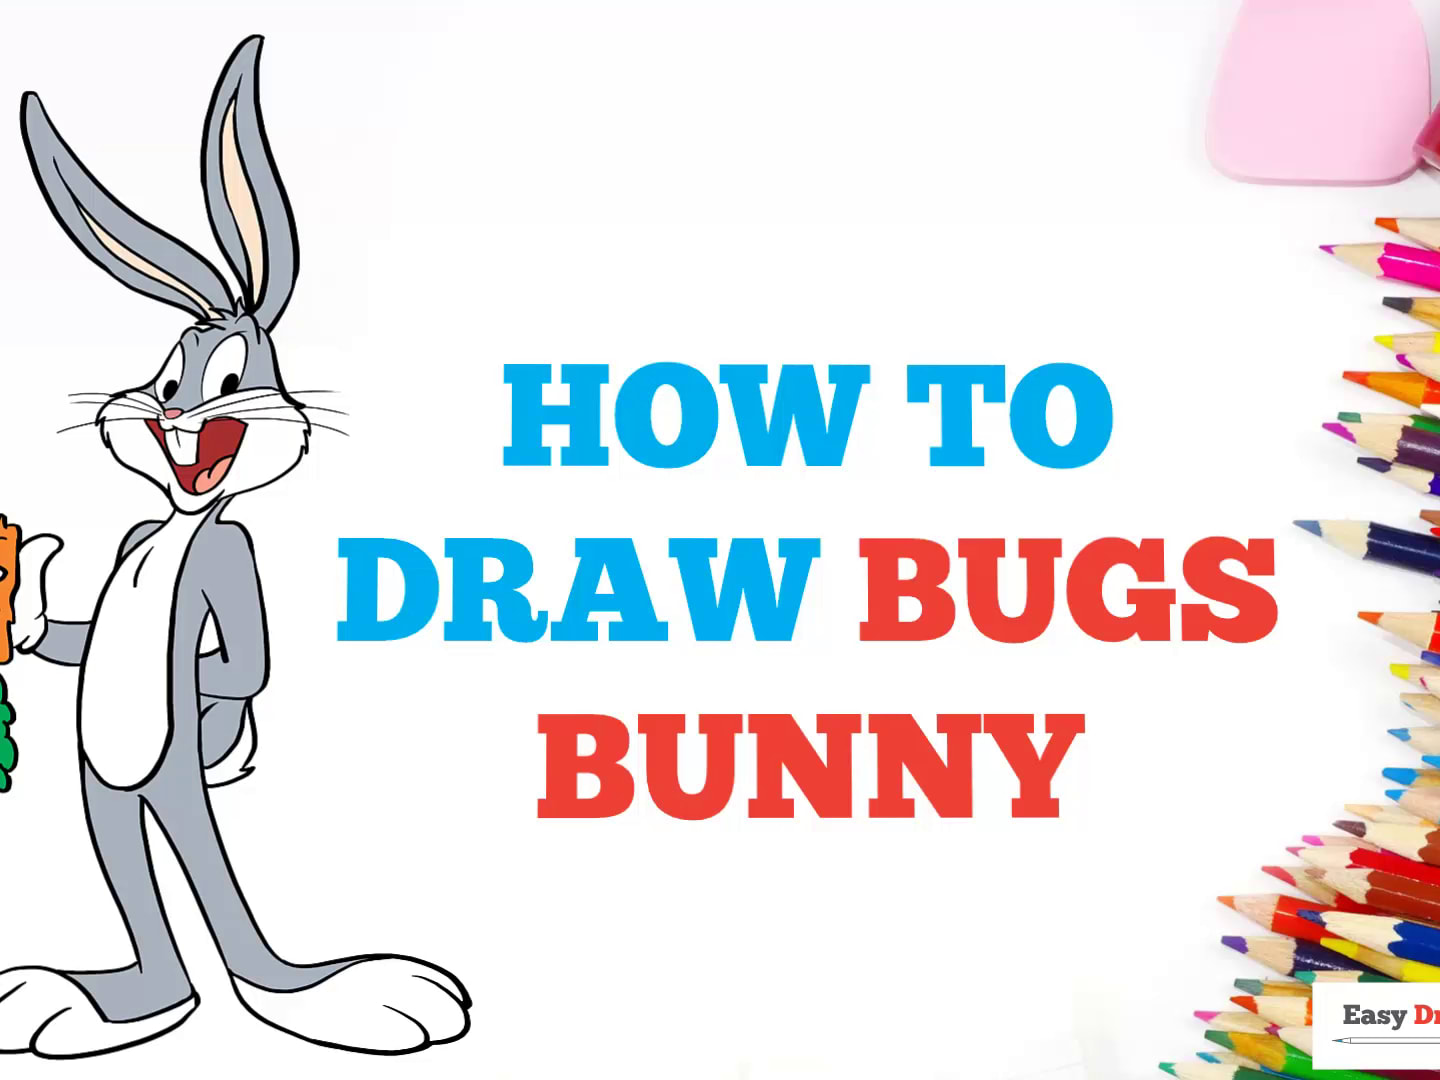 How to Draw Bugs Bunny - Really Easy Drawing Tutorial